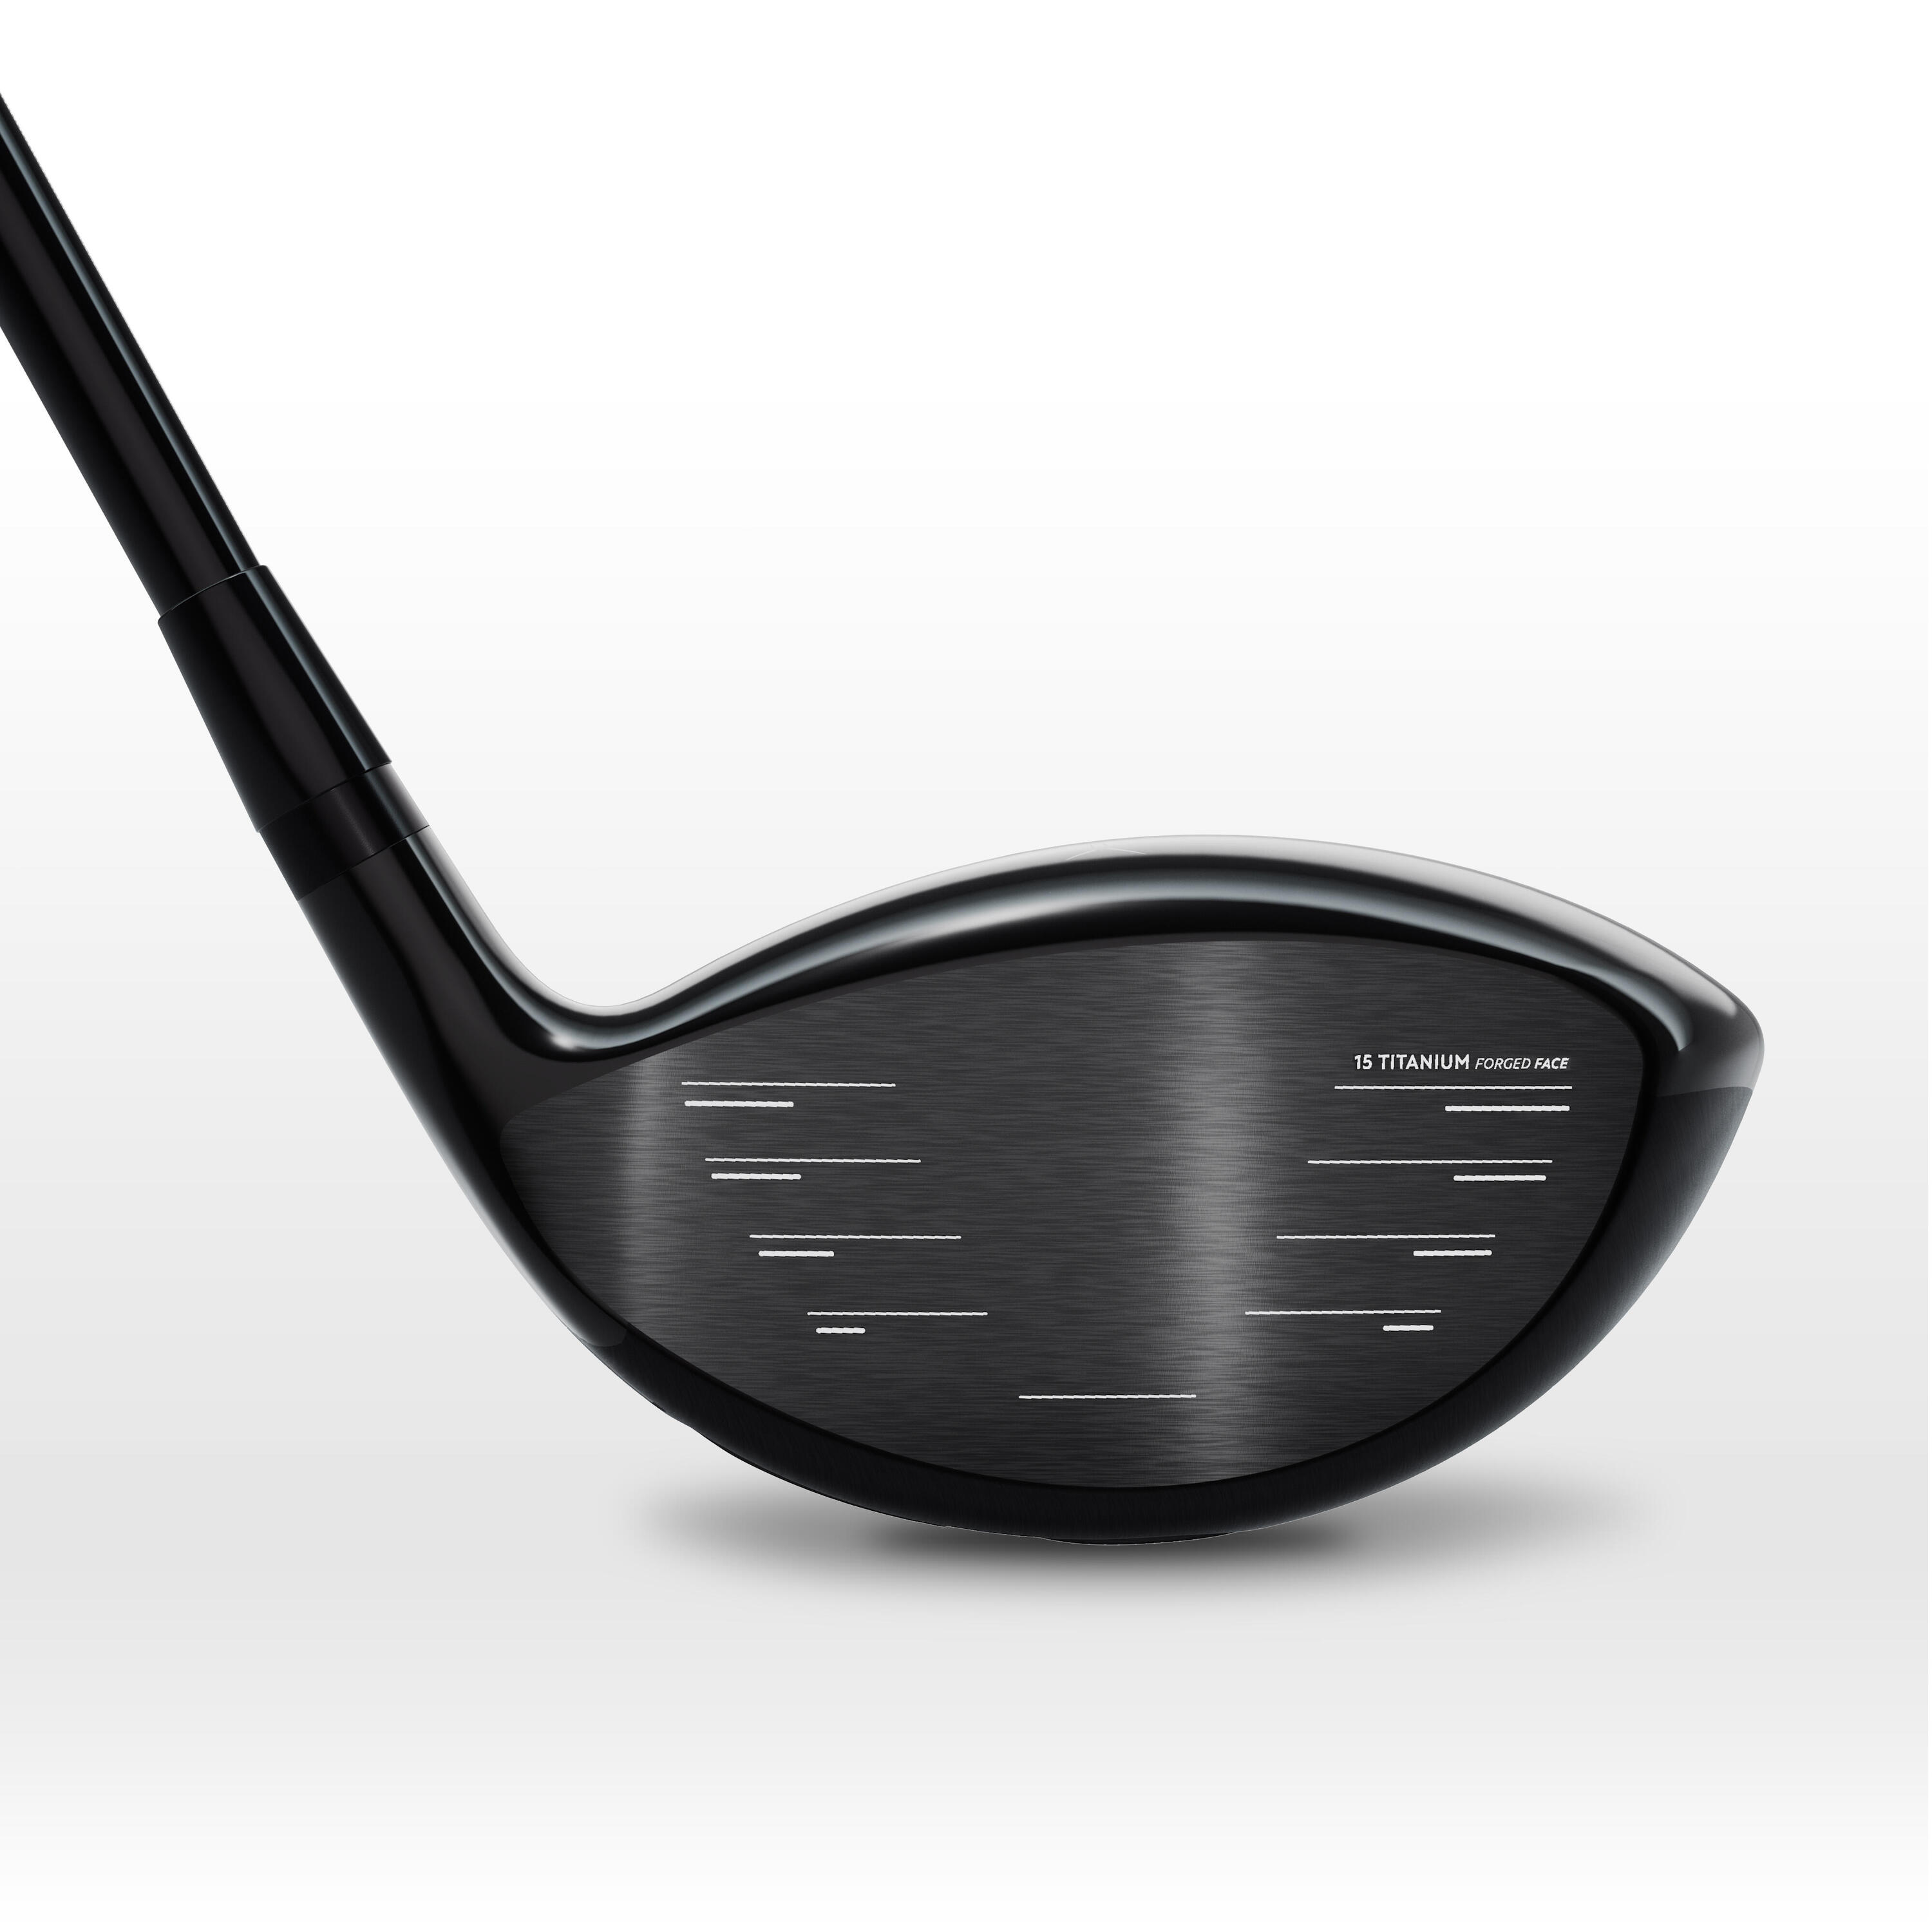 Golf driver left handed low speed - INESIS 900 4/8